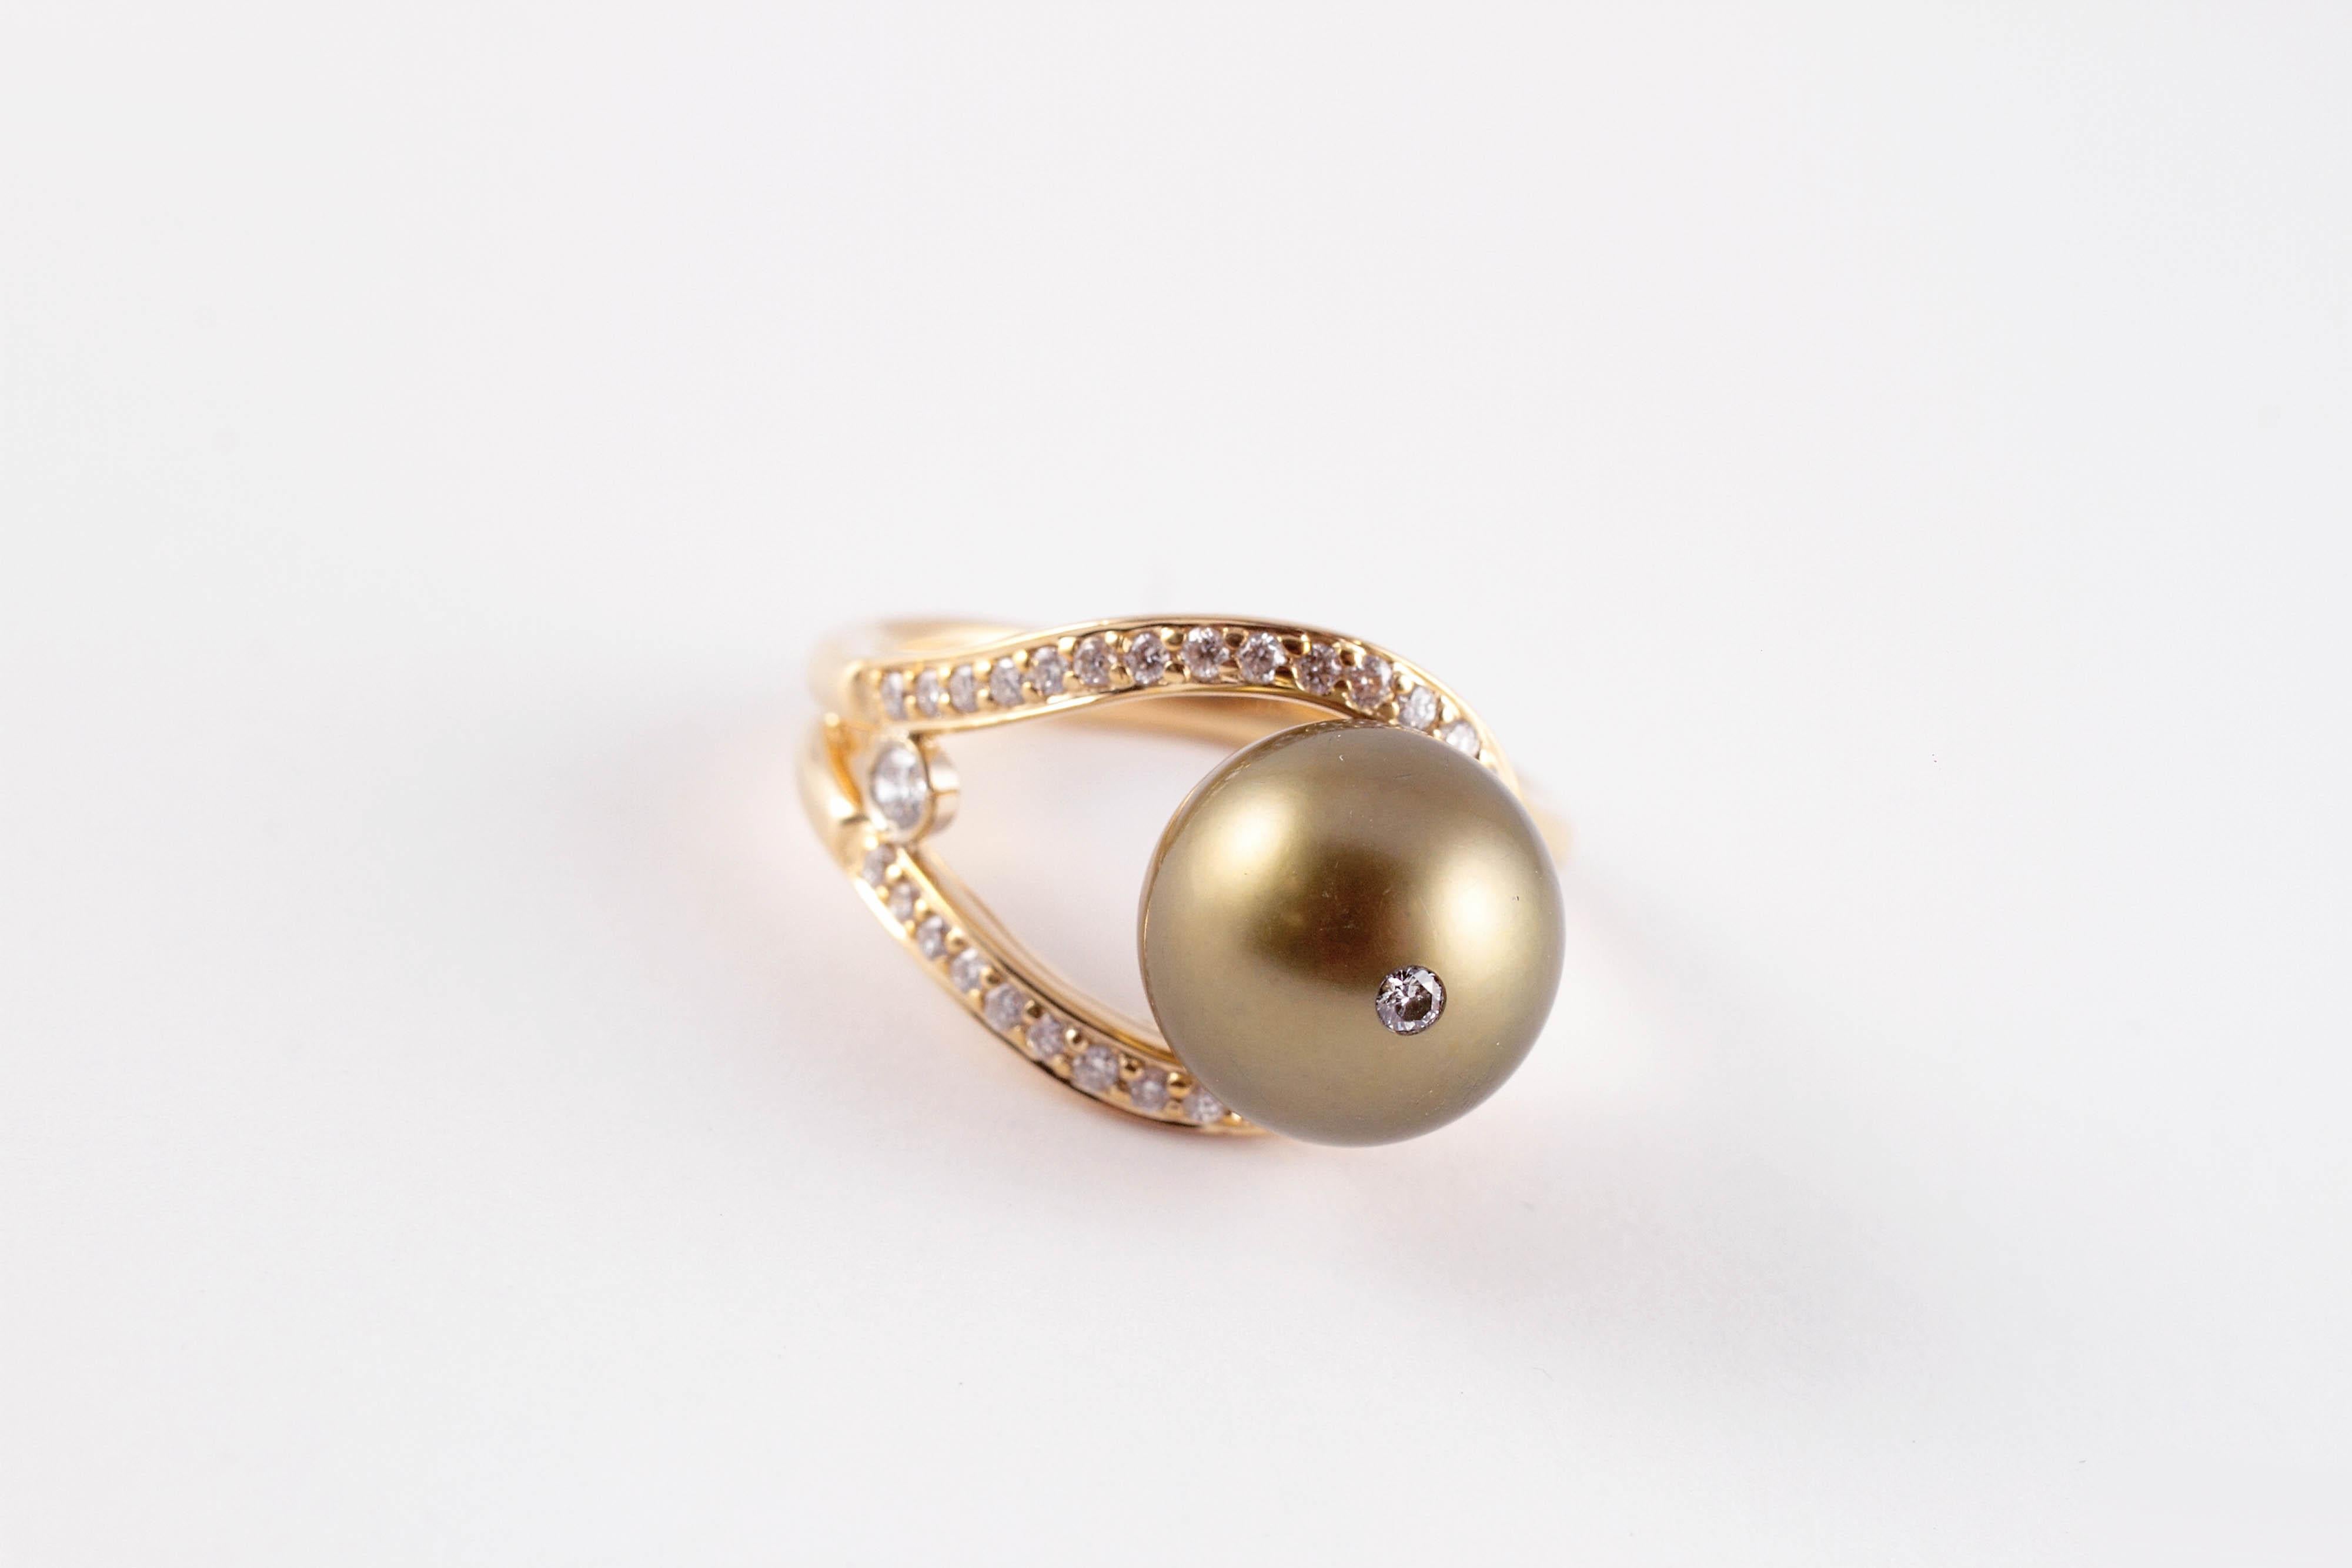 This beautiful 11.00 mm Tahitian Pearl is made even more lovely by the addition of a small diamond on the top!  Composed of 14 karat yellow gold, with accent diamonds in the band, this ring by Honora is a size 8 1/4.